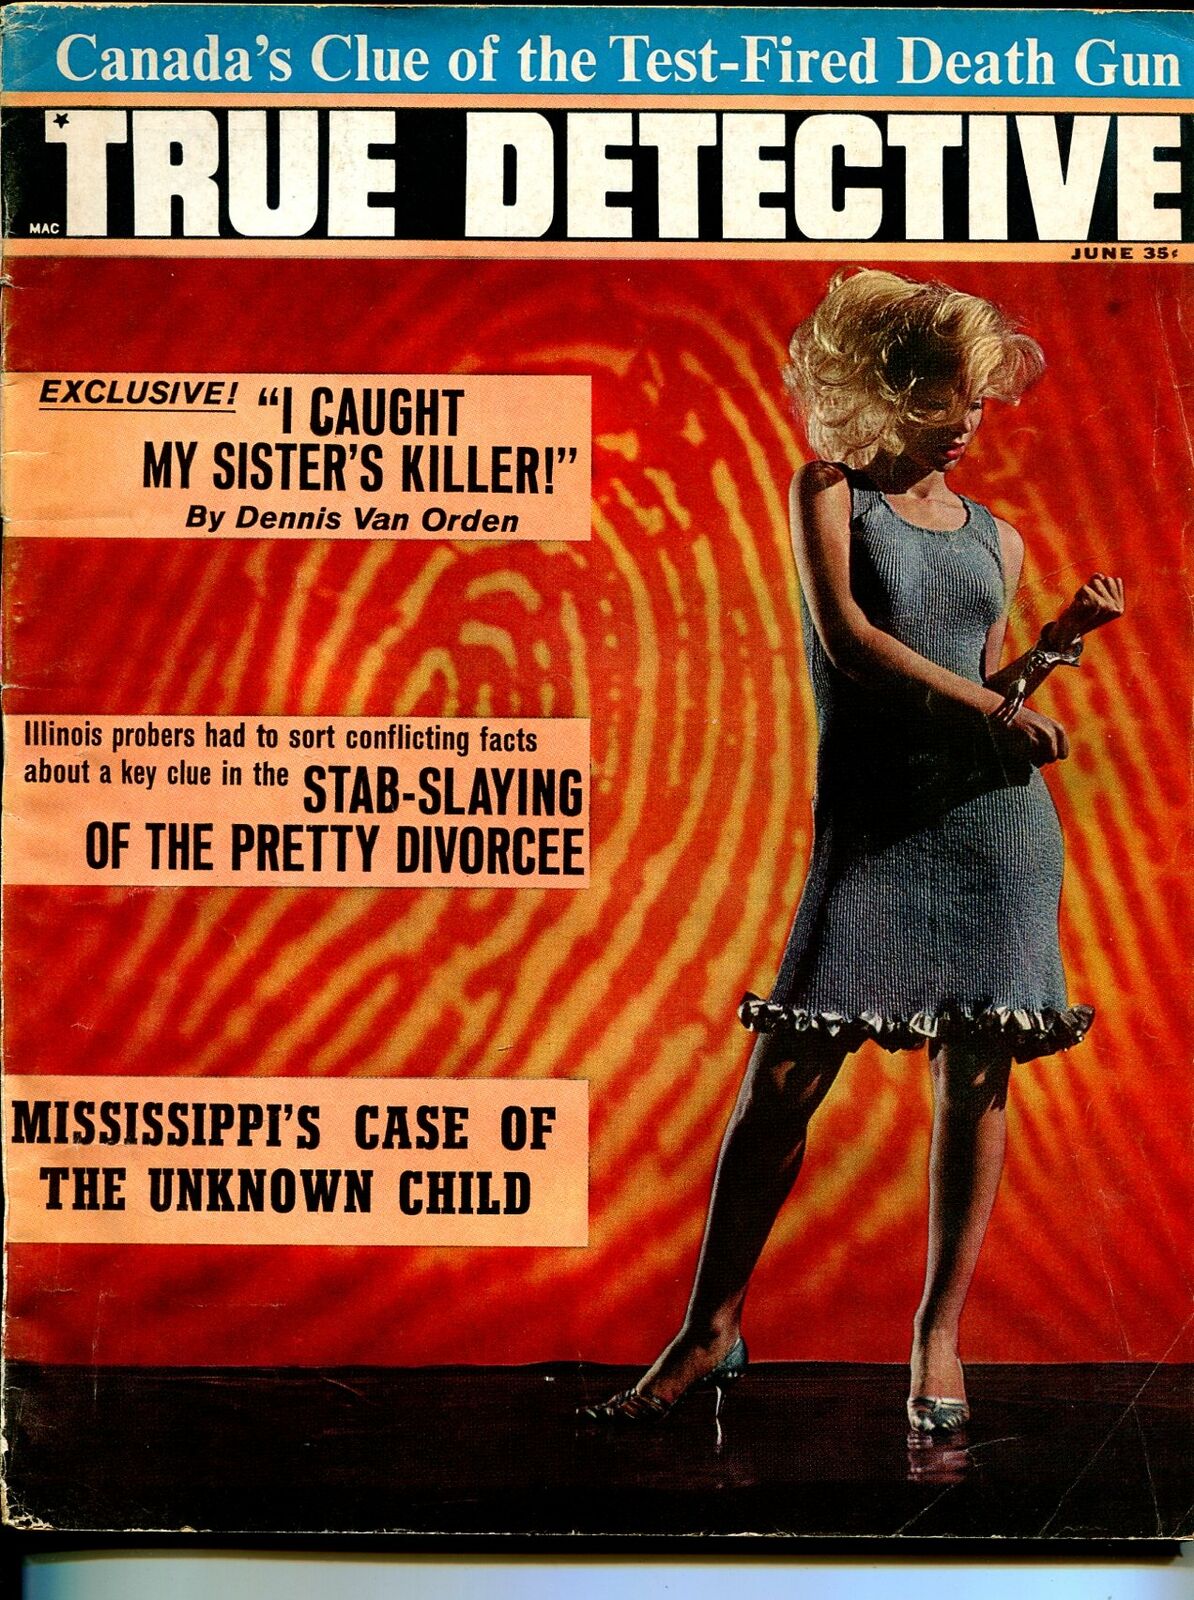 True Detective 6/1966-psycedelic cover-handcuffed blonde babe-violent crime-VG